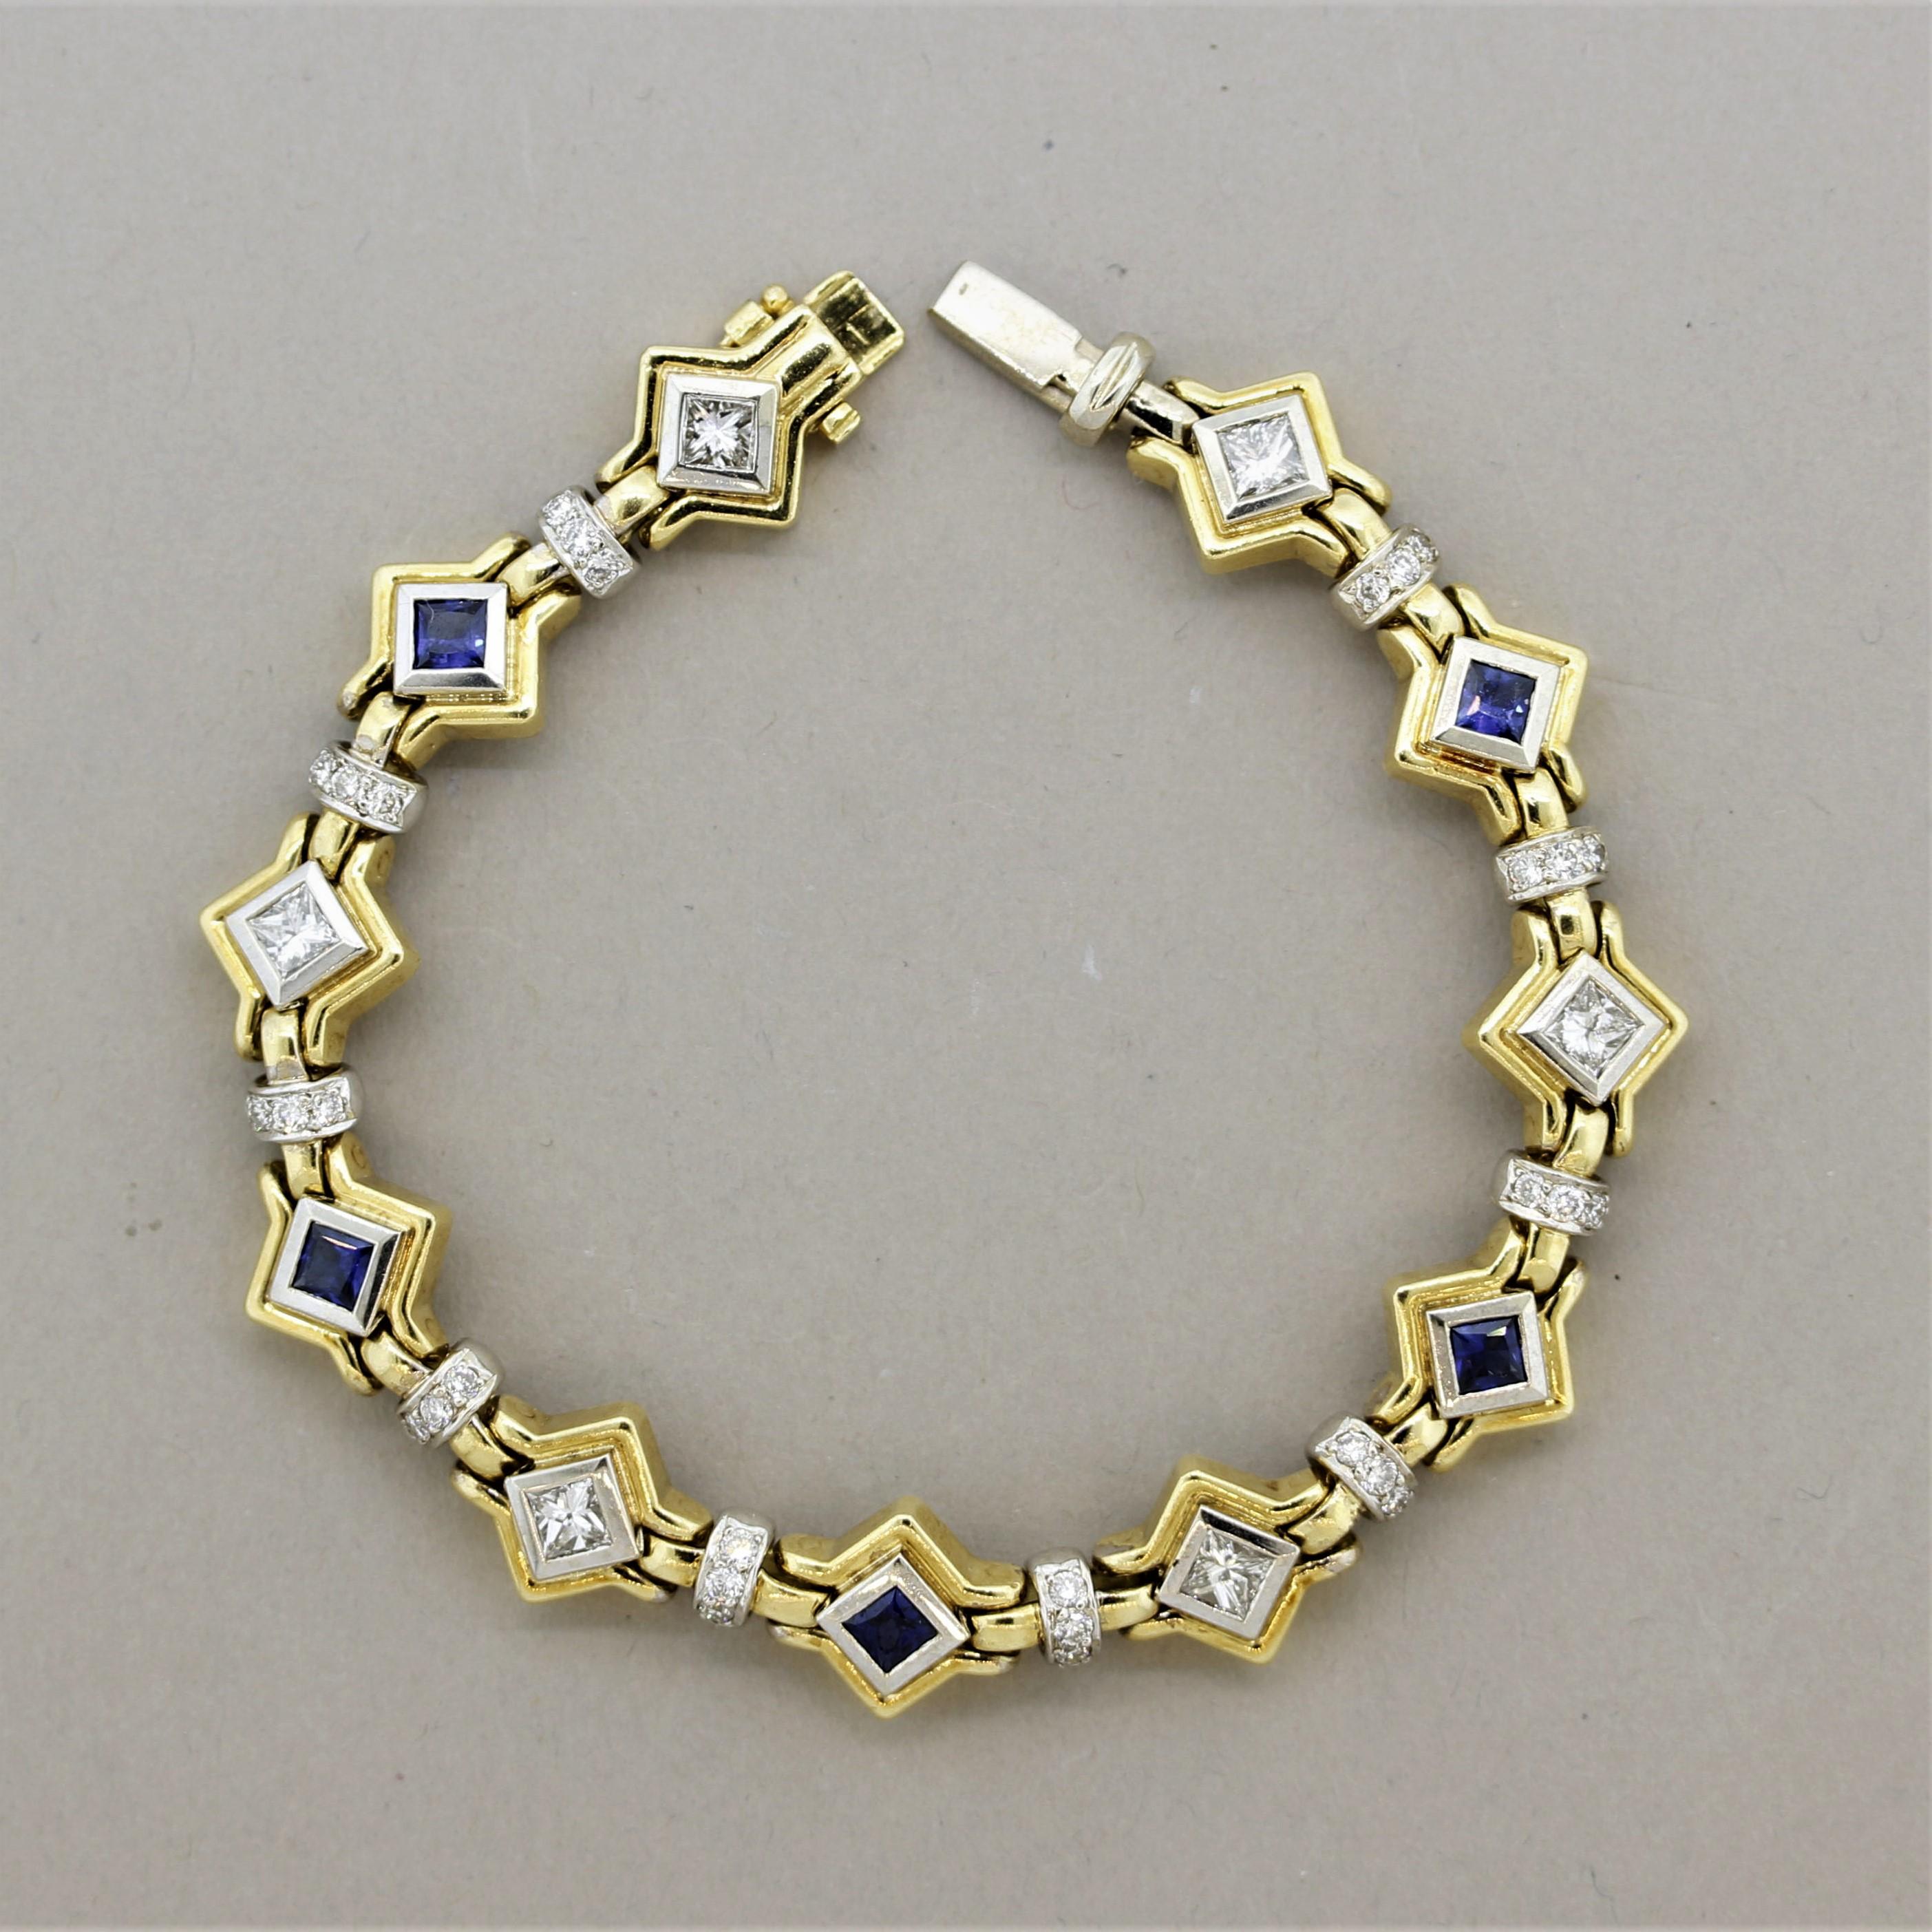 A stylish bracelet featuring 2.17 carats of fine round brilliant-cut and princess-cut diamonds. Adding to that are 1.44 carats of vivid blue square-shape sapphires adding color to the bracelet. Made in 18k white & yellow gold for an added contrast